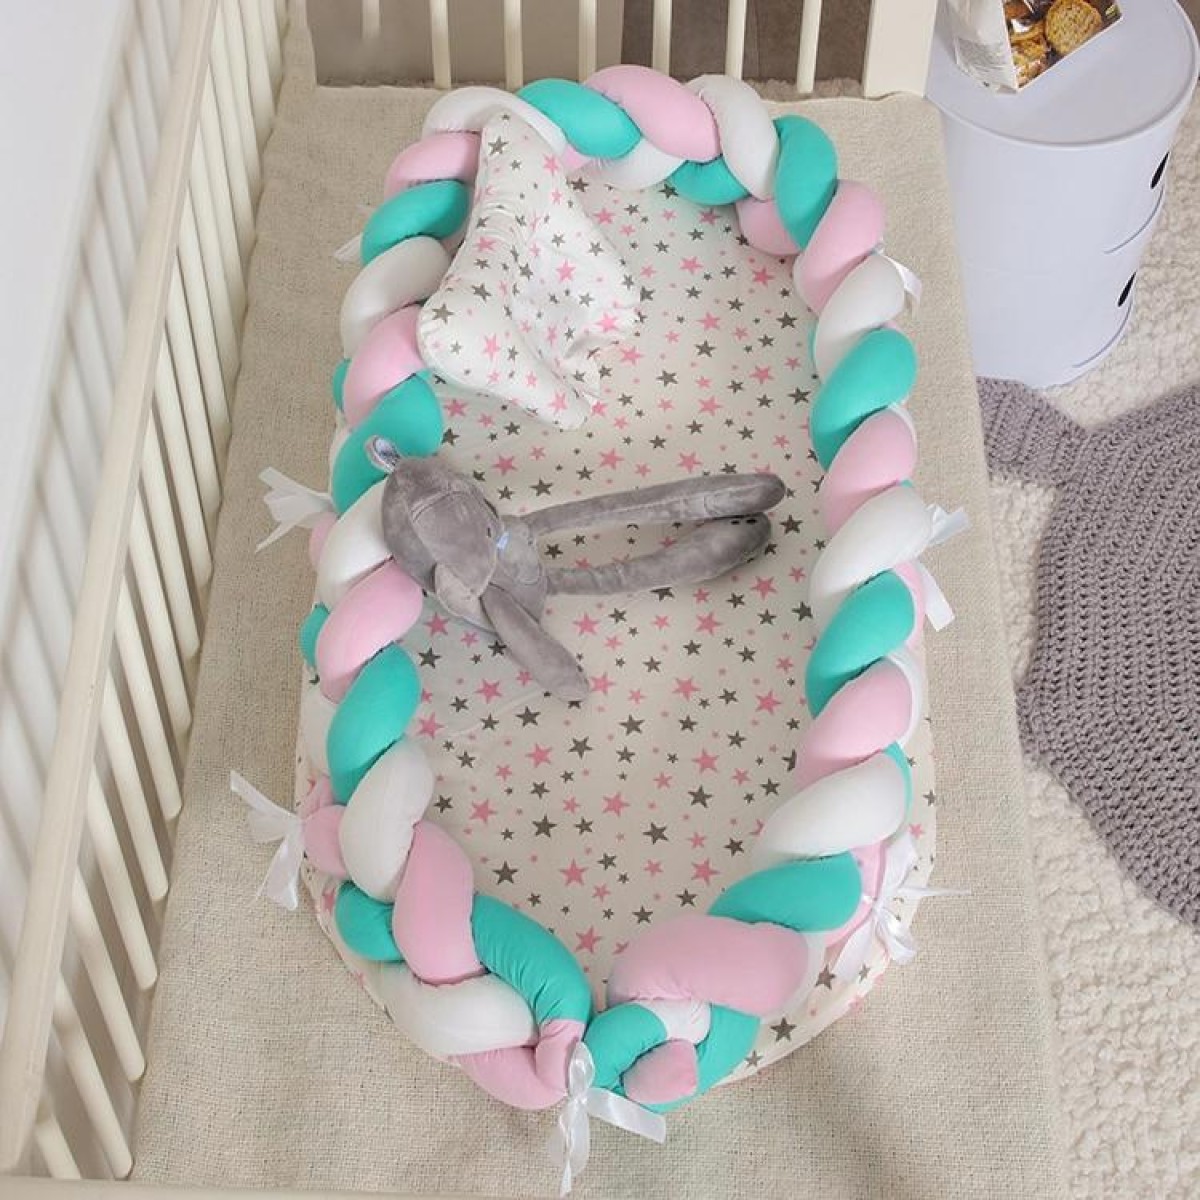 Cotton Woven Folding Portable Crib Bed Bionic Removable and Washable Manual Fence Three-dimensional Protective Crib(White blue pink)